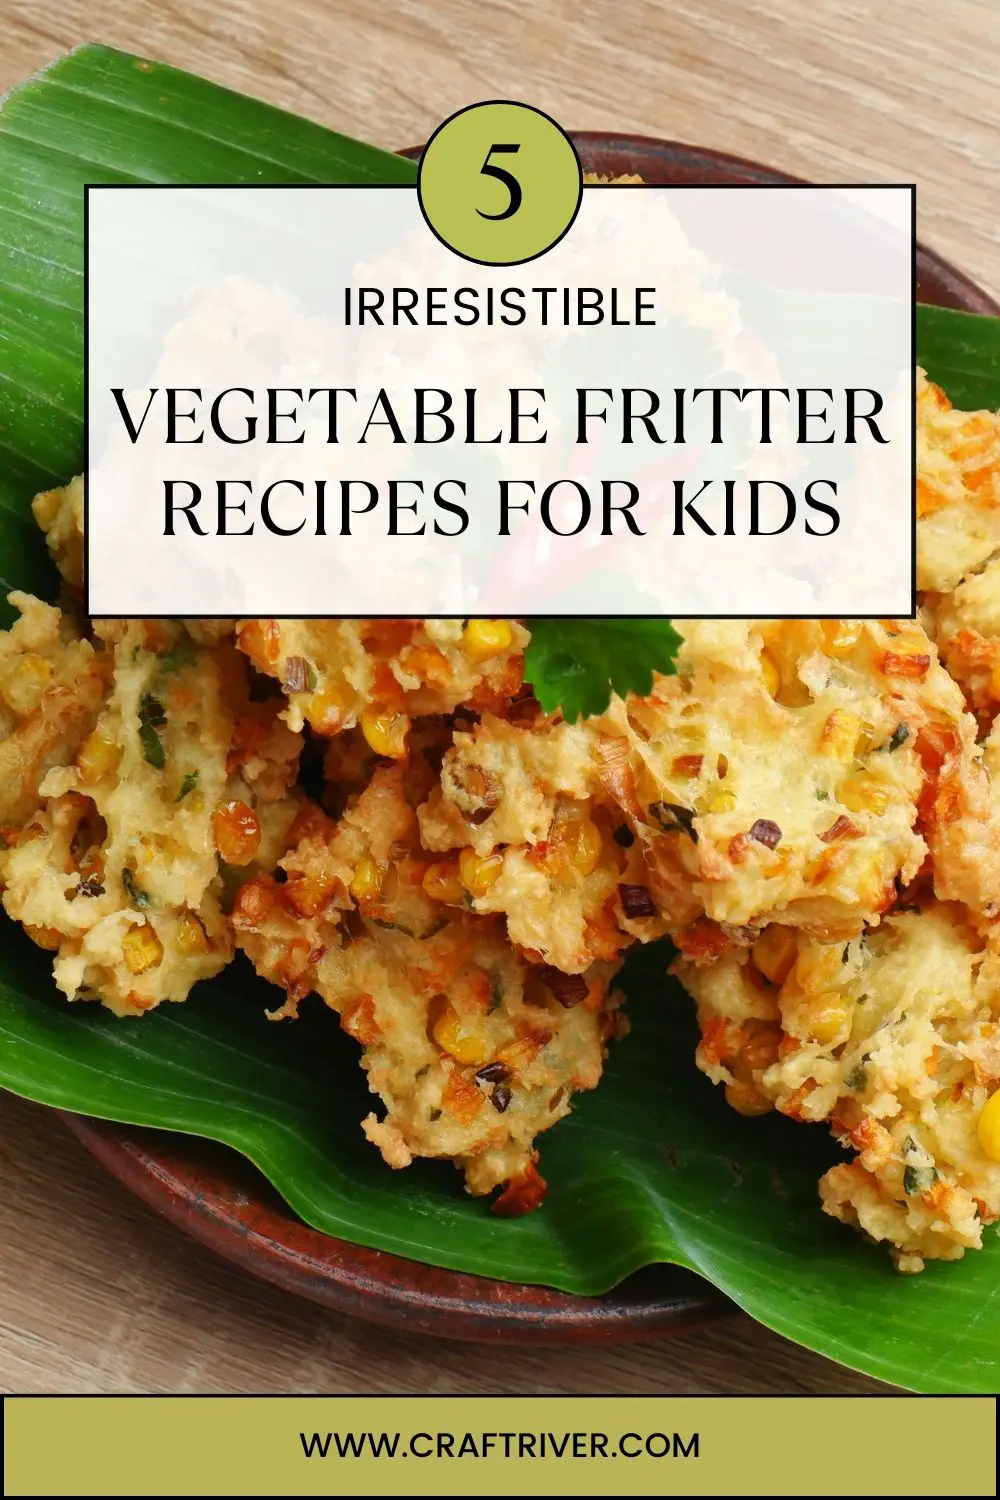 Irresistible Vegetable Fritter Recipes For Kids